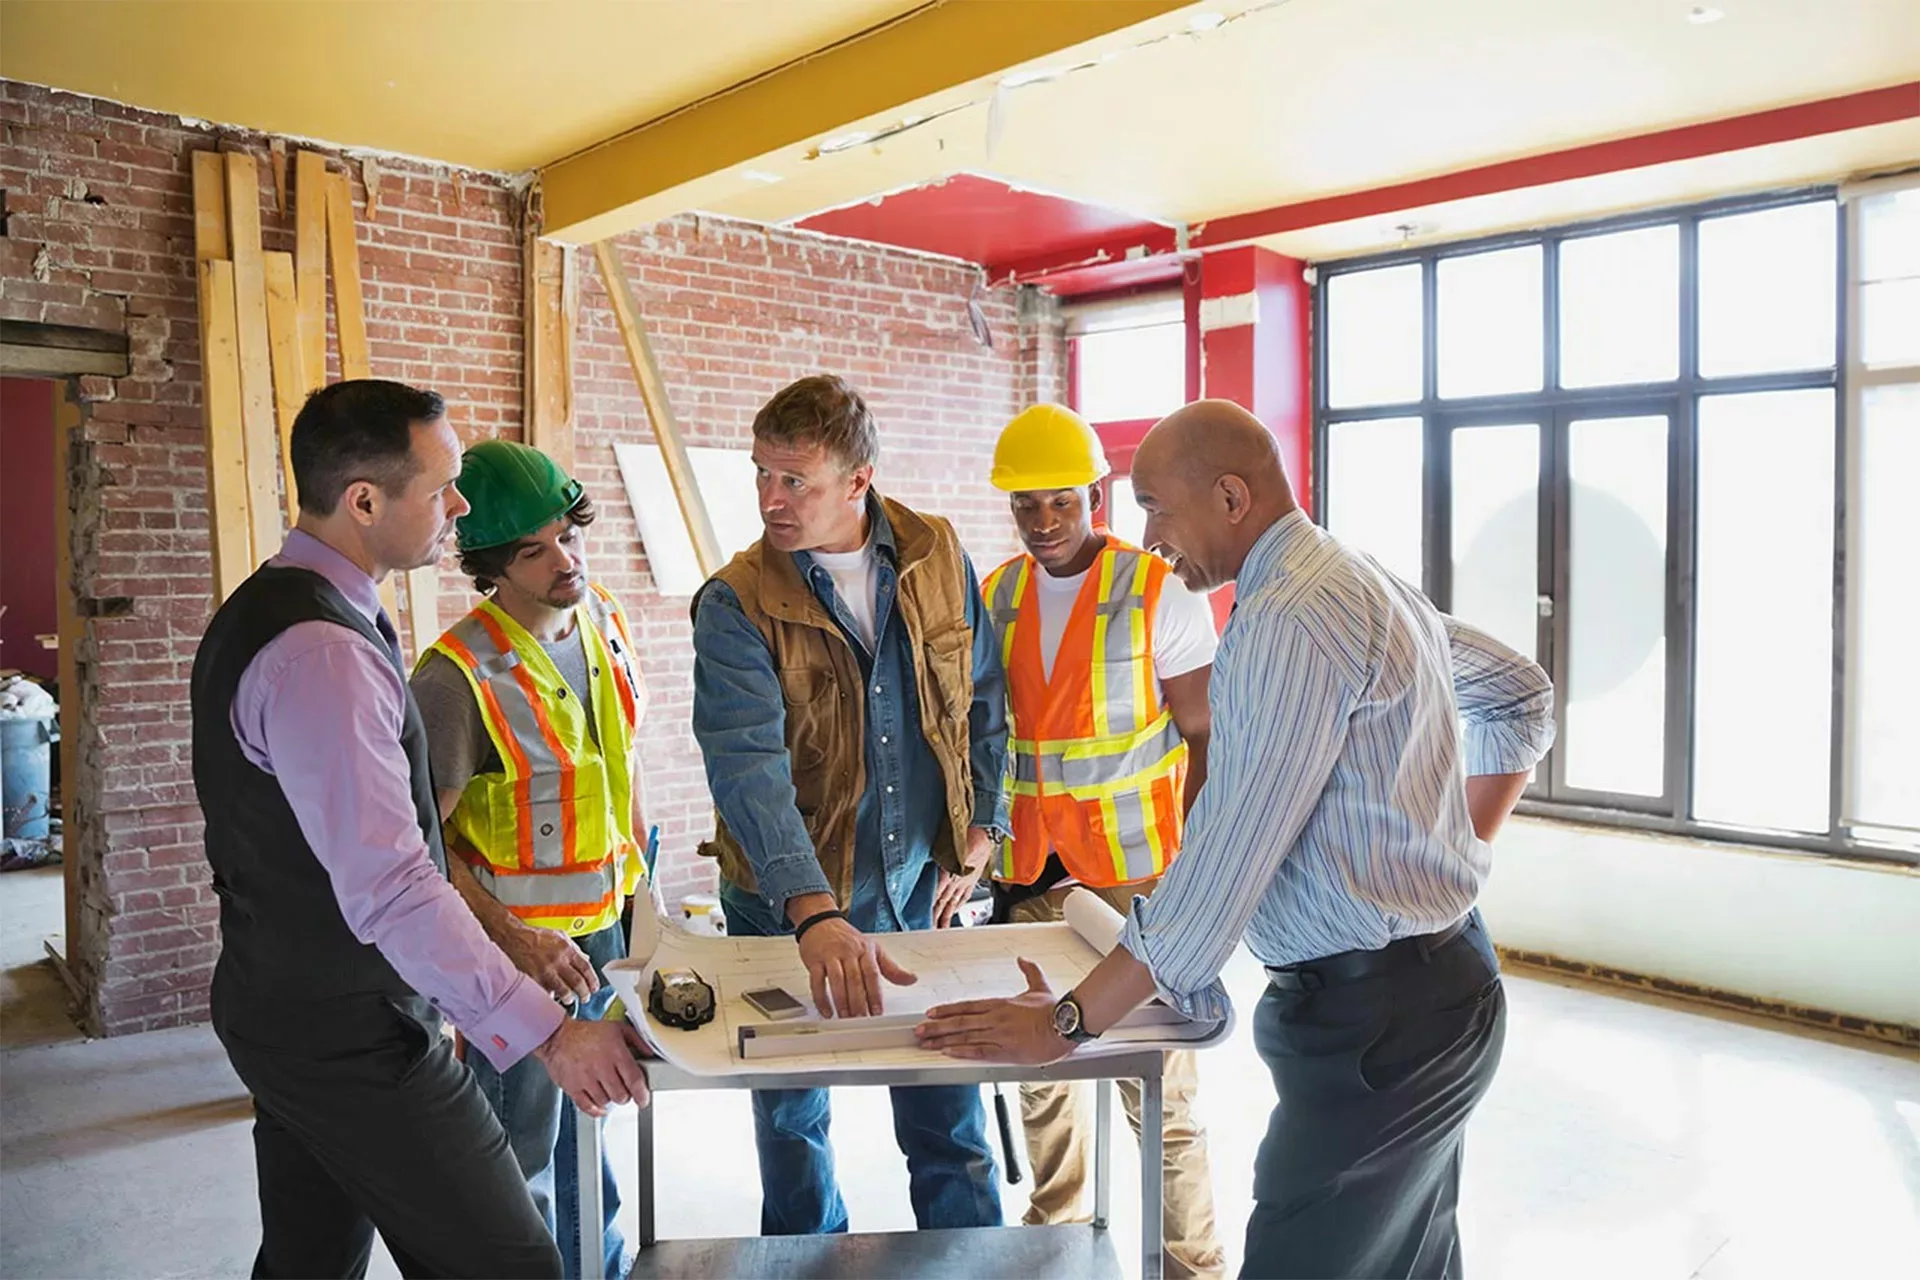 boise business owner, architect and general contractors gather together to review blueprint for commercial renovation project